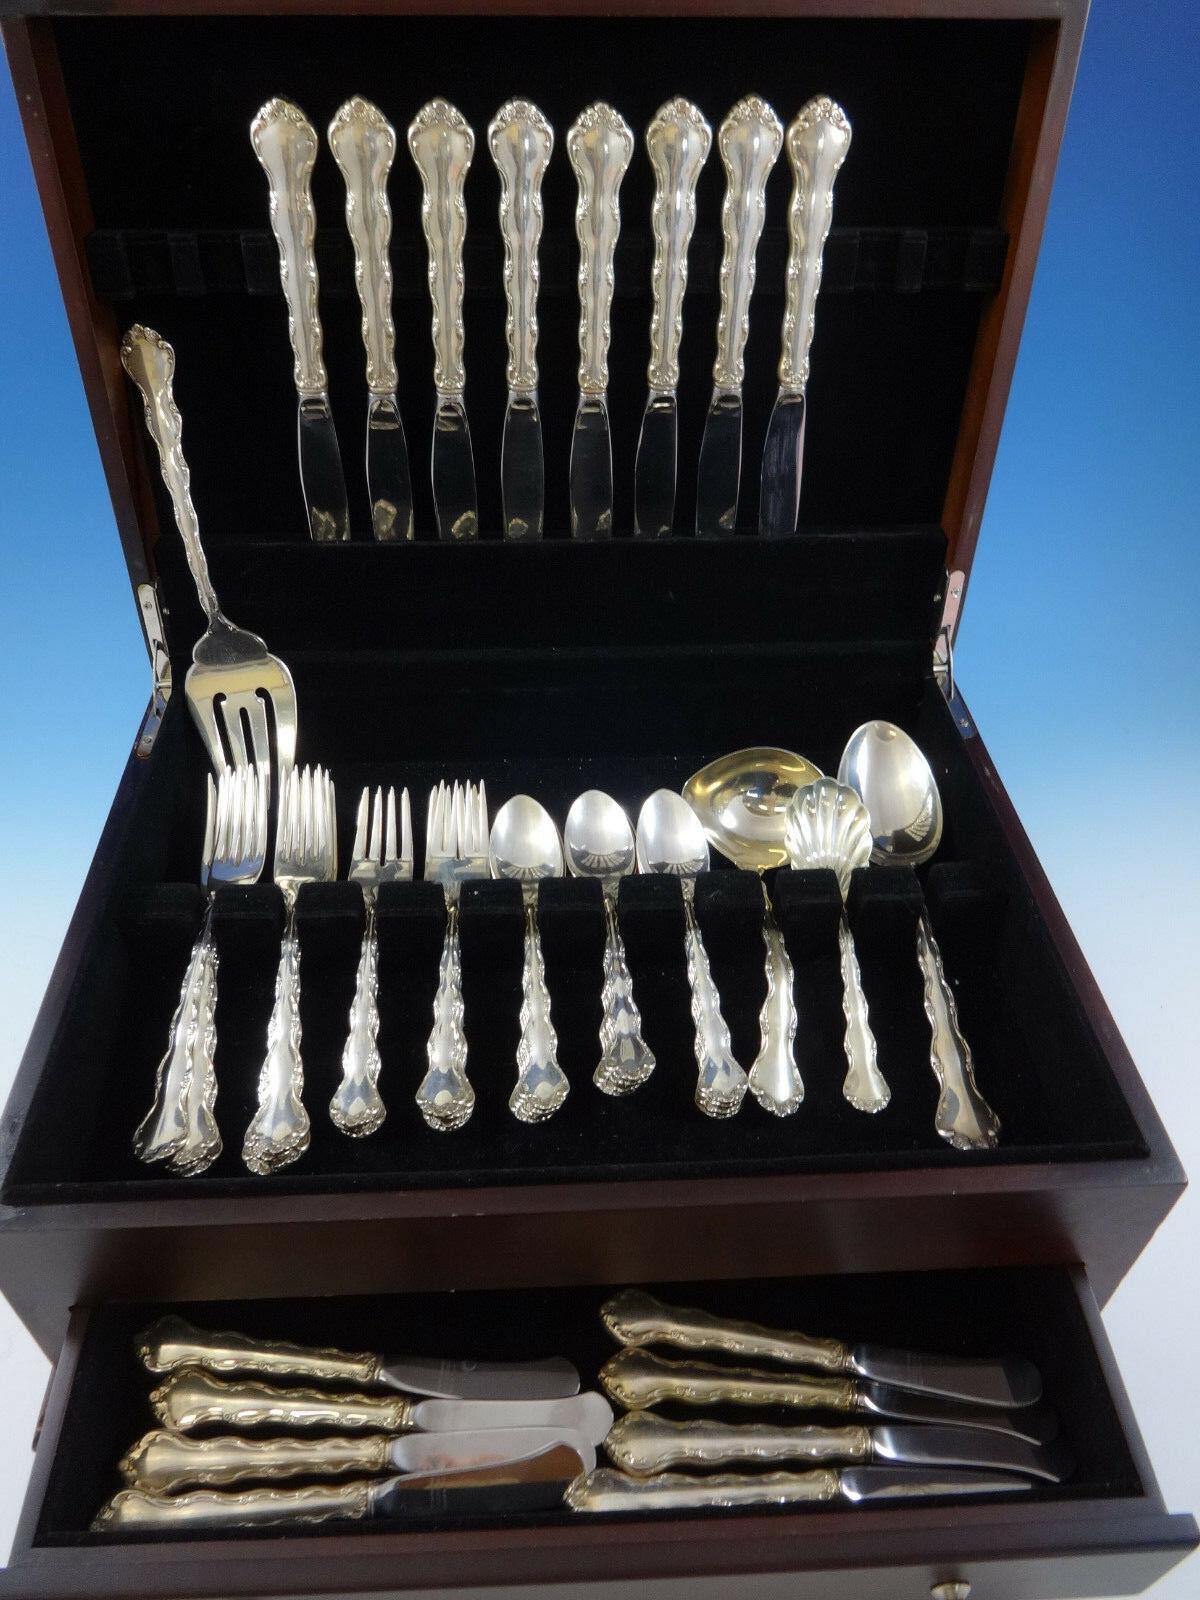 Beautiful Tara by Reed & Barton sterling silver Flatware set - 44 pieces. This set includes:

8 knives, 9